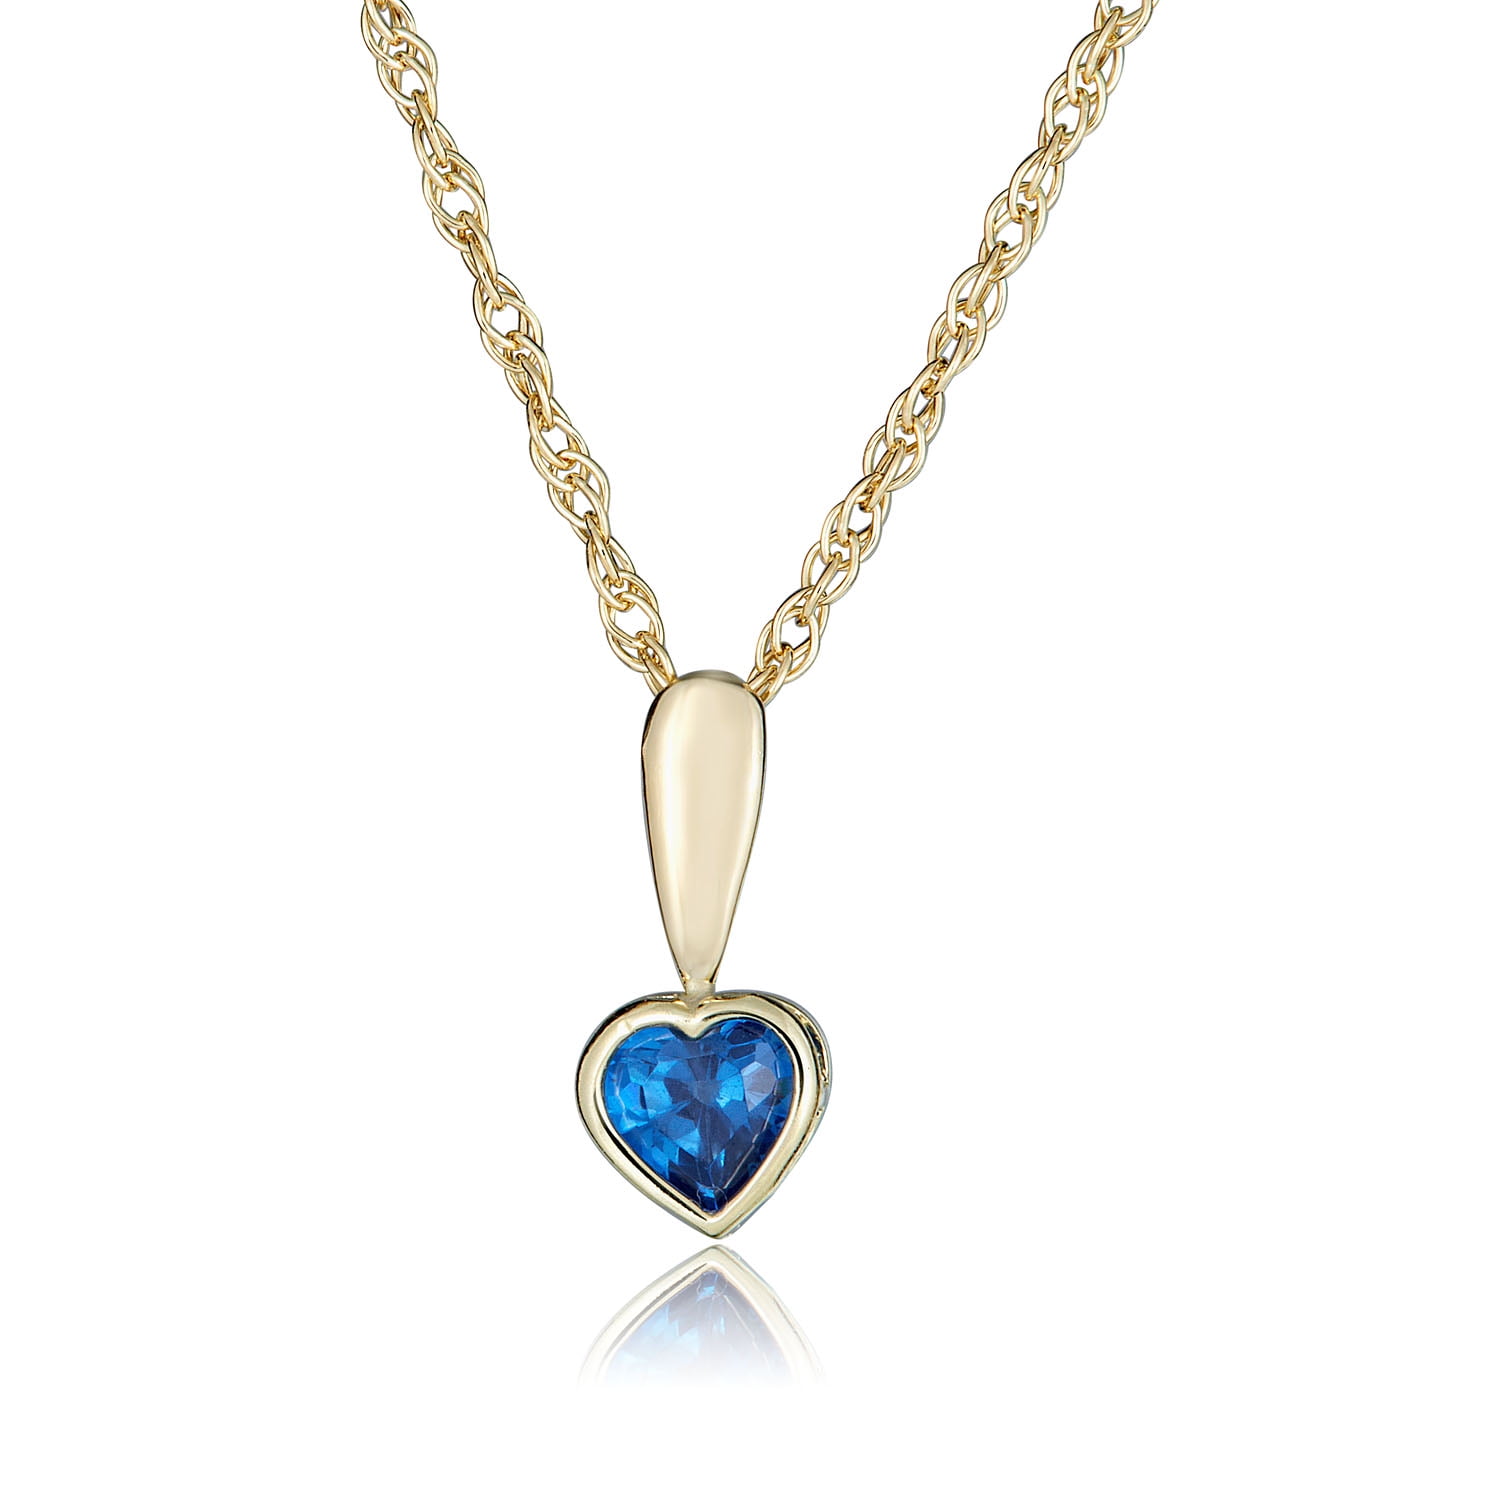 White gold finish 18k gold blue sapphire heart pendant necklace gift boxed 